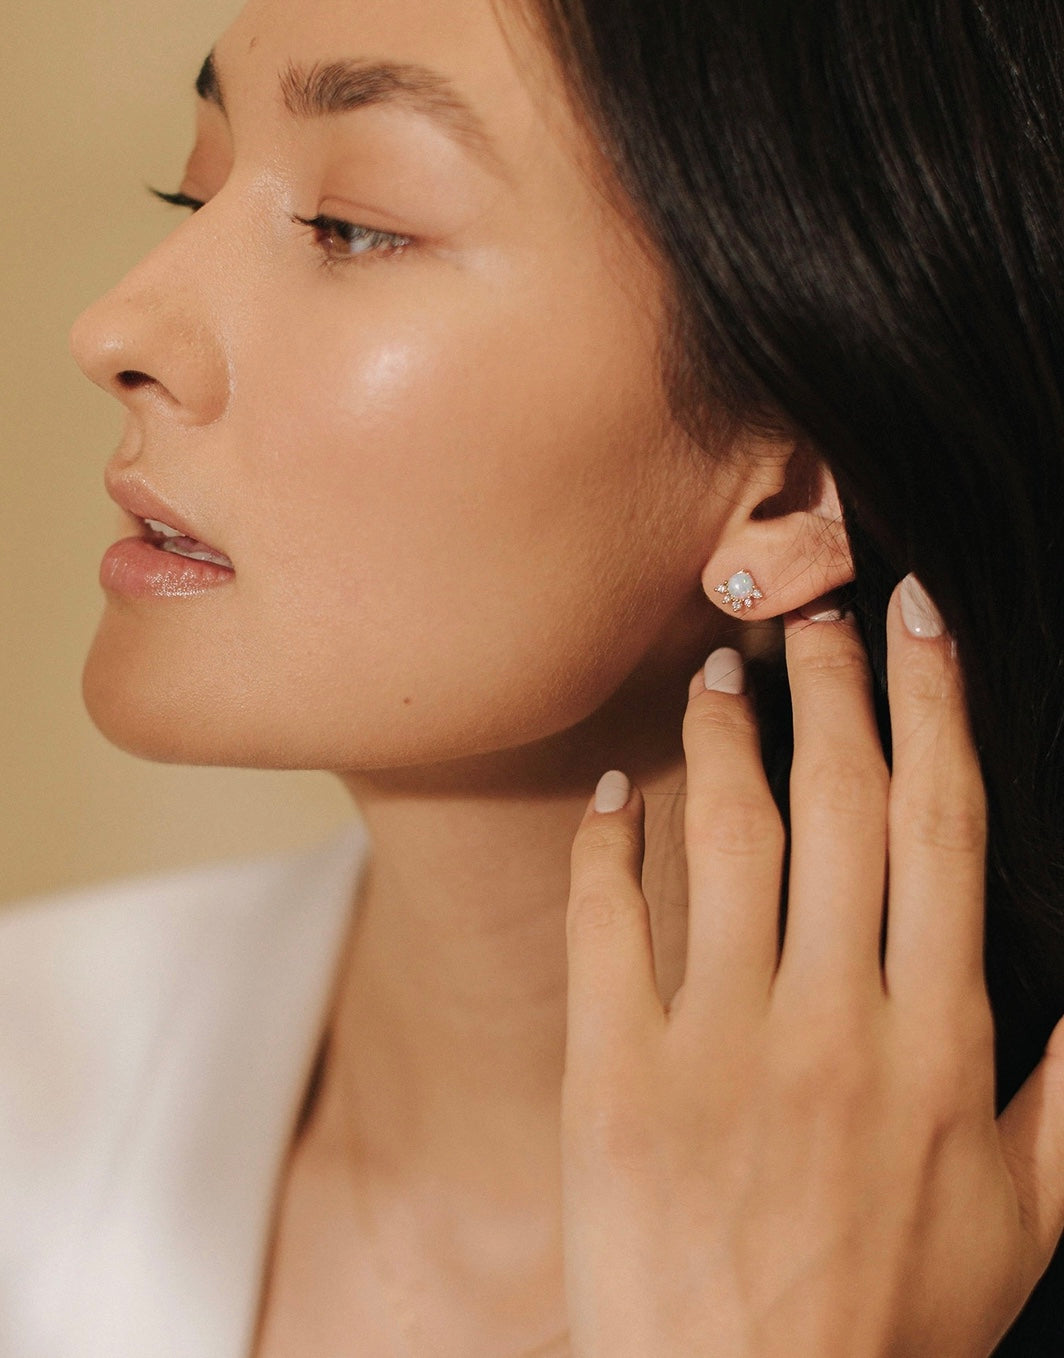 model wearing Juno Stud Earrings by Lover's Tempo in a Simulated Opal with 5 Cubic Zirconia stones